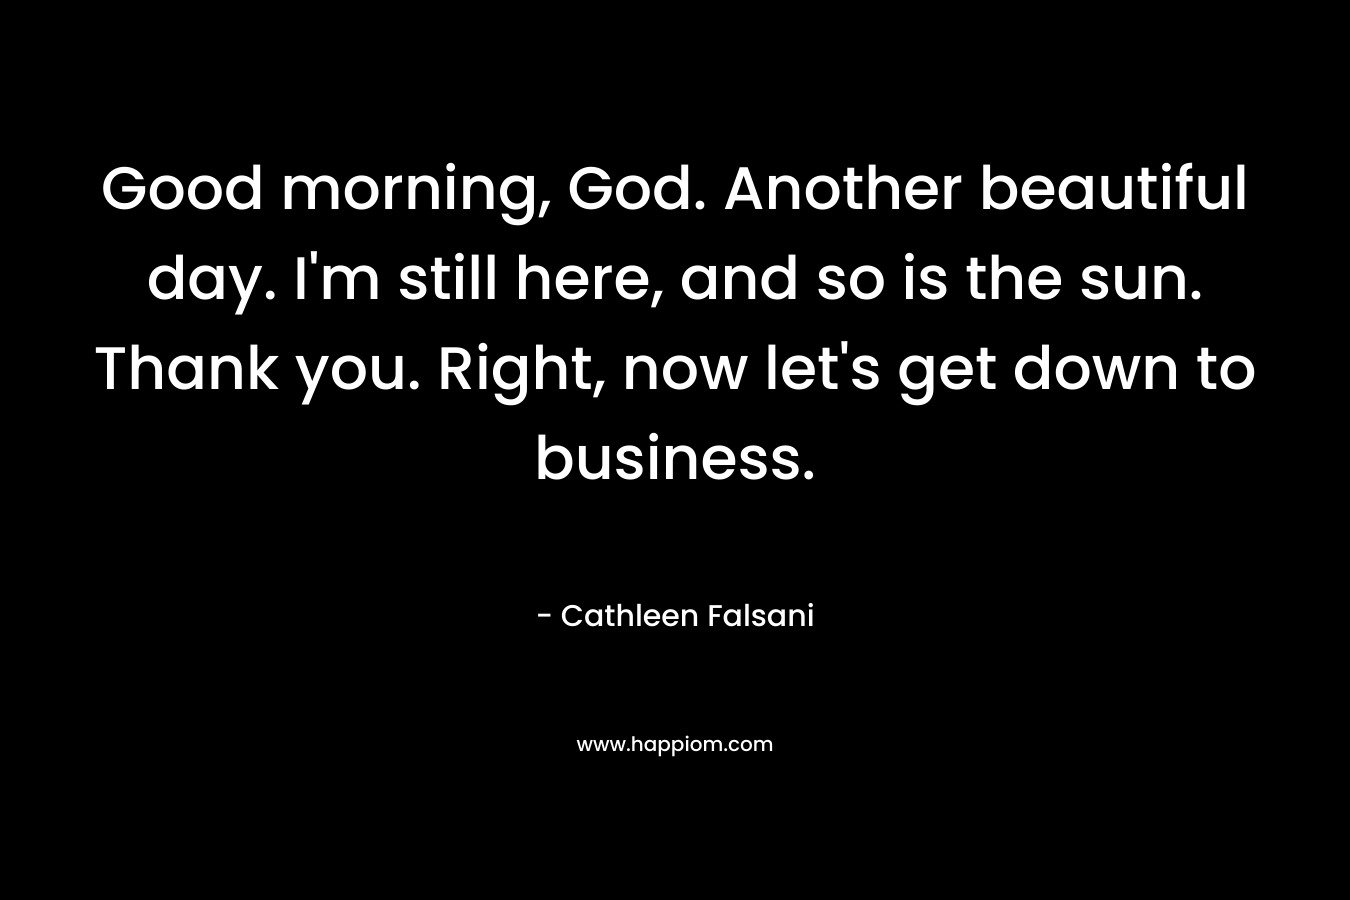 Good morning, God. Another beautiful day. I’m still here, and so is the sun. Thank you. Right, now let’s get down to business. – Cathleen Falsani